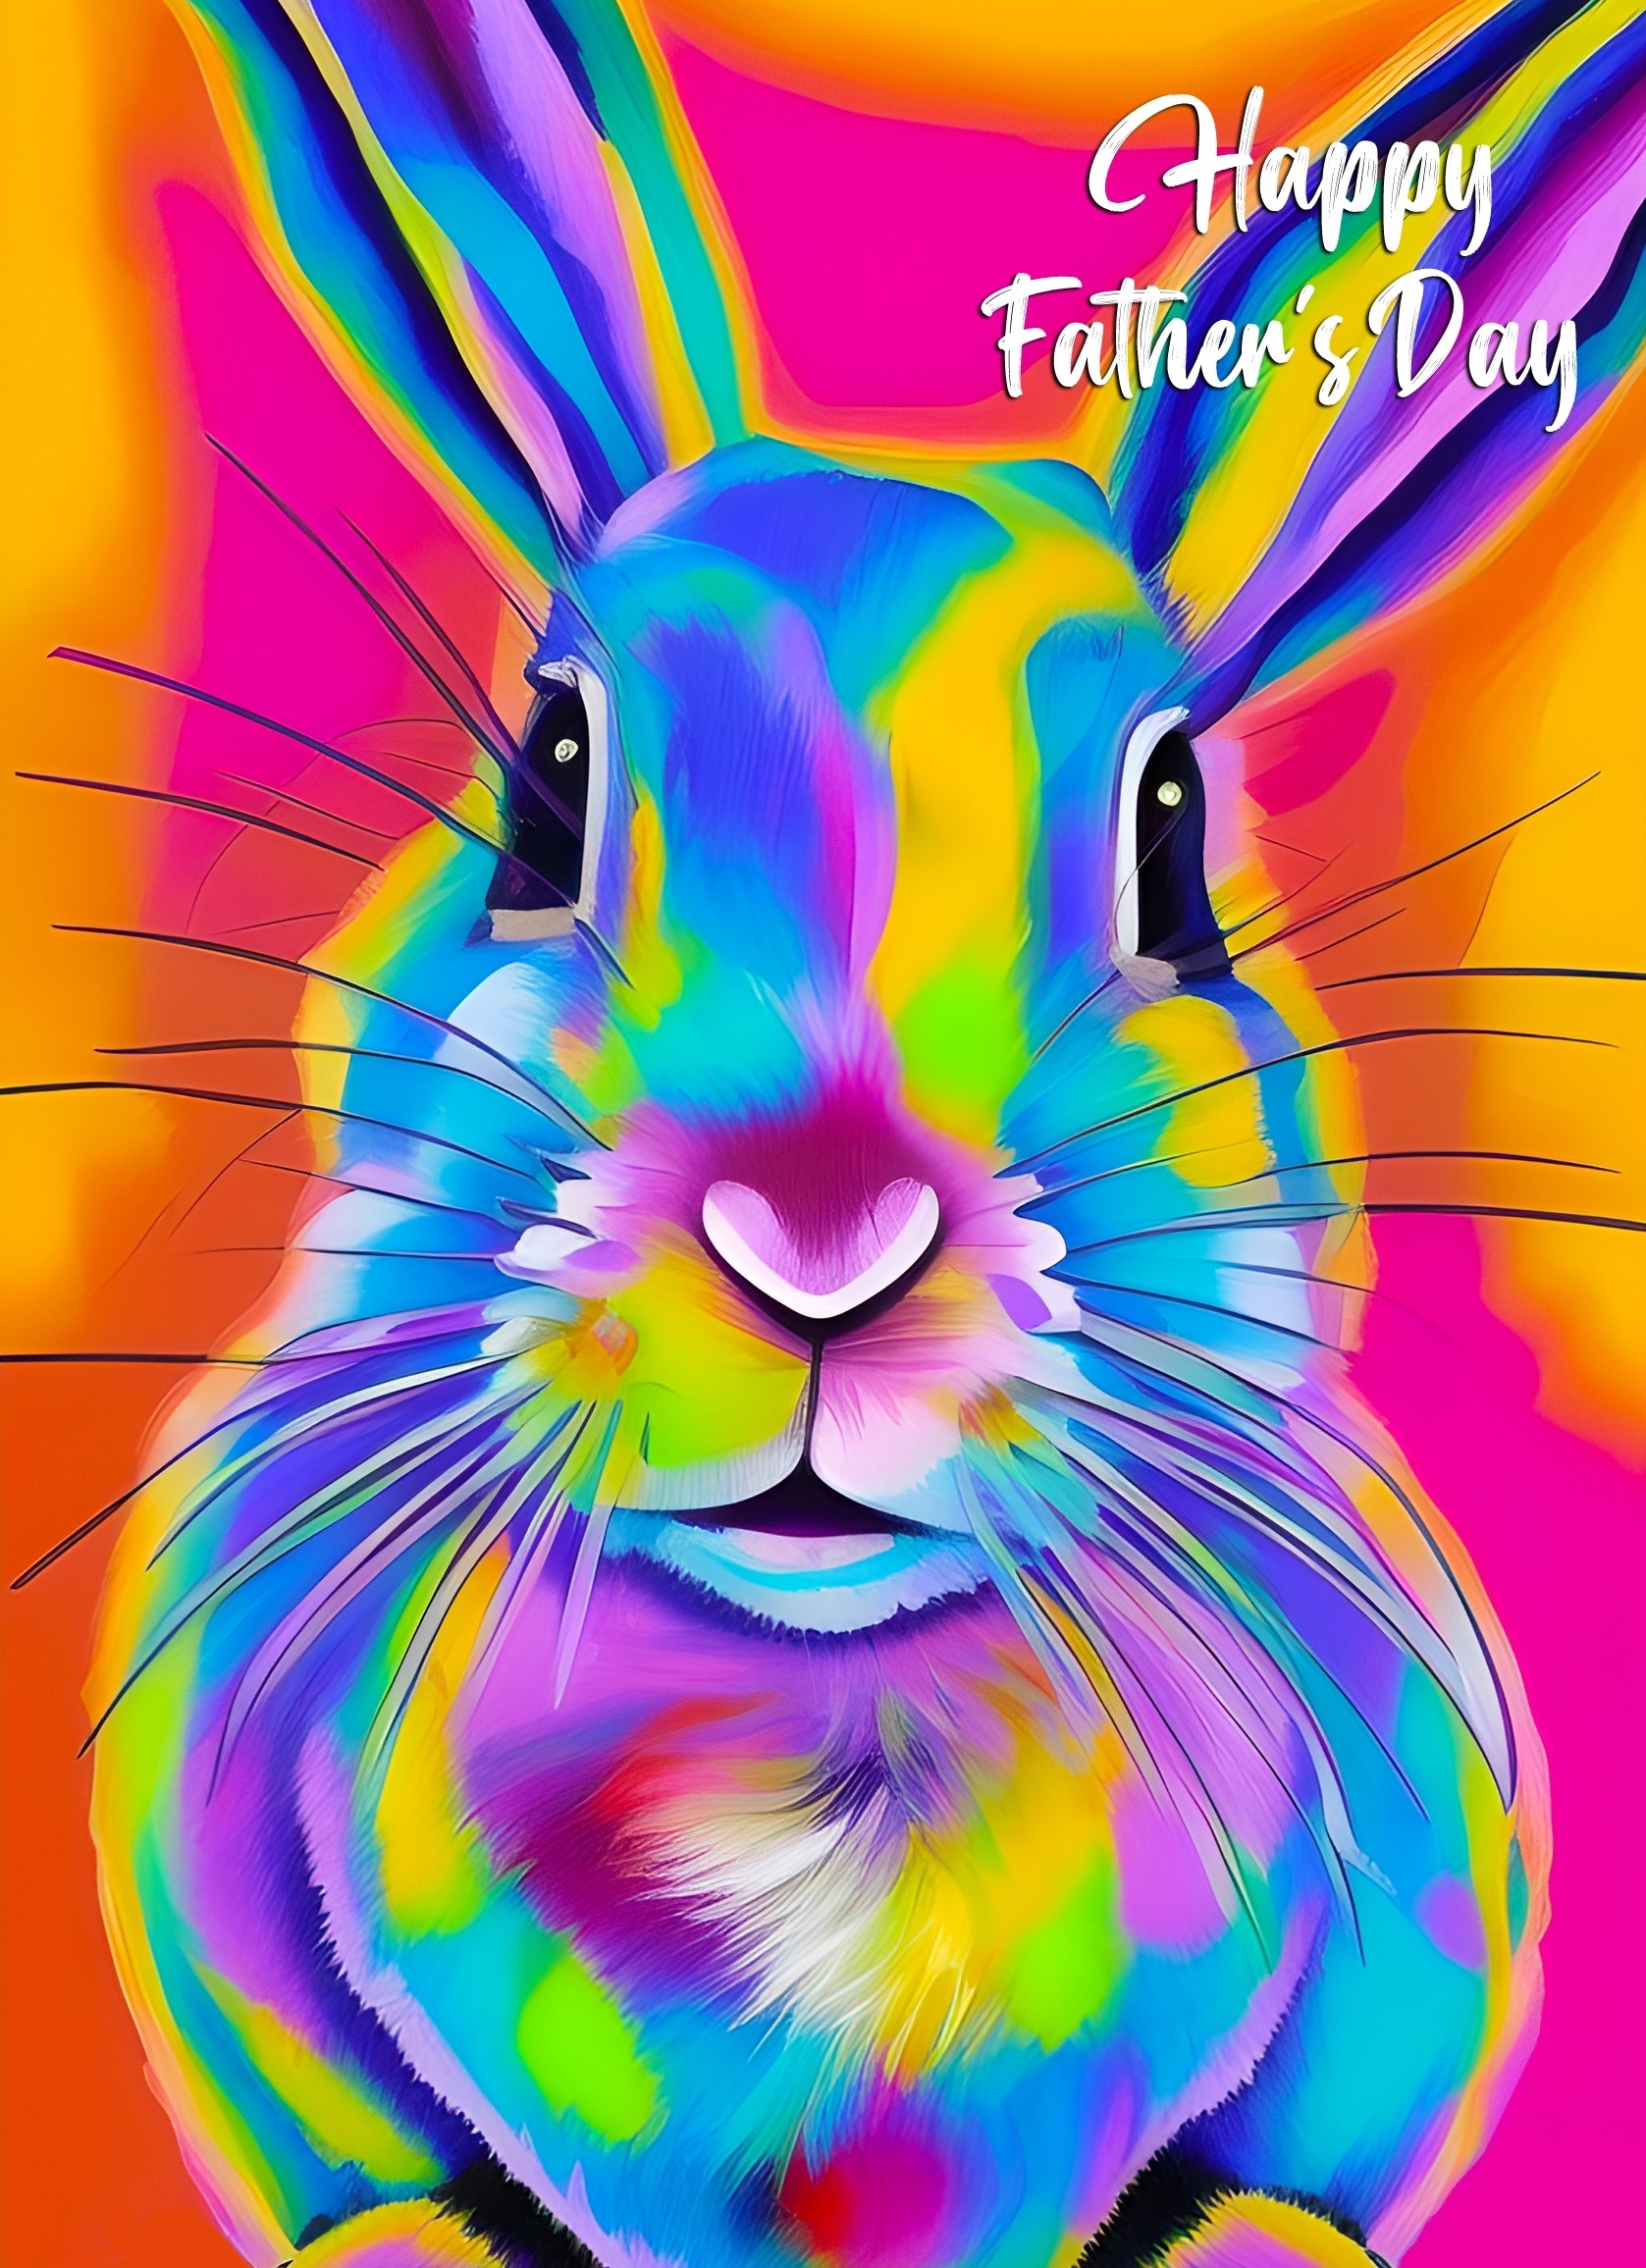 Rabbit Animal Colourful Abstract Art Fathers Day Card